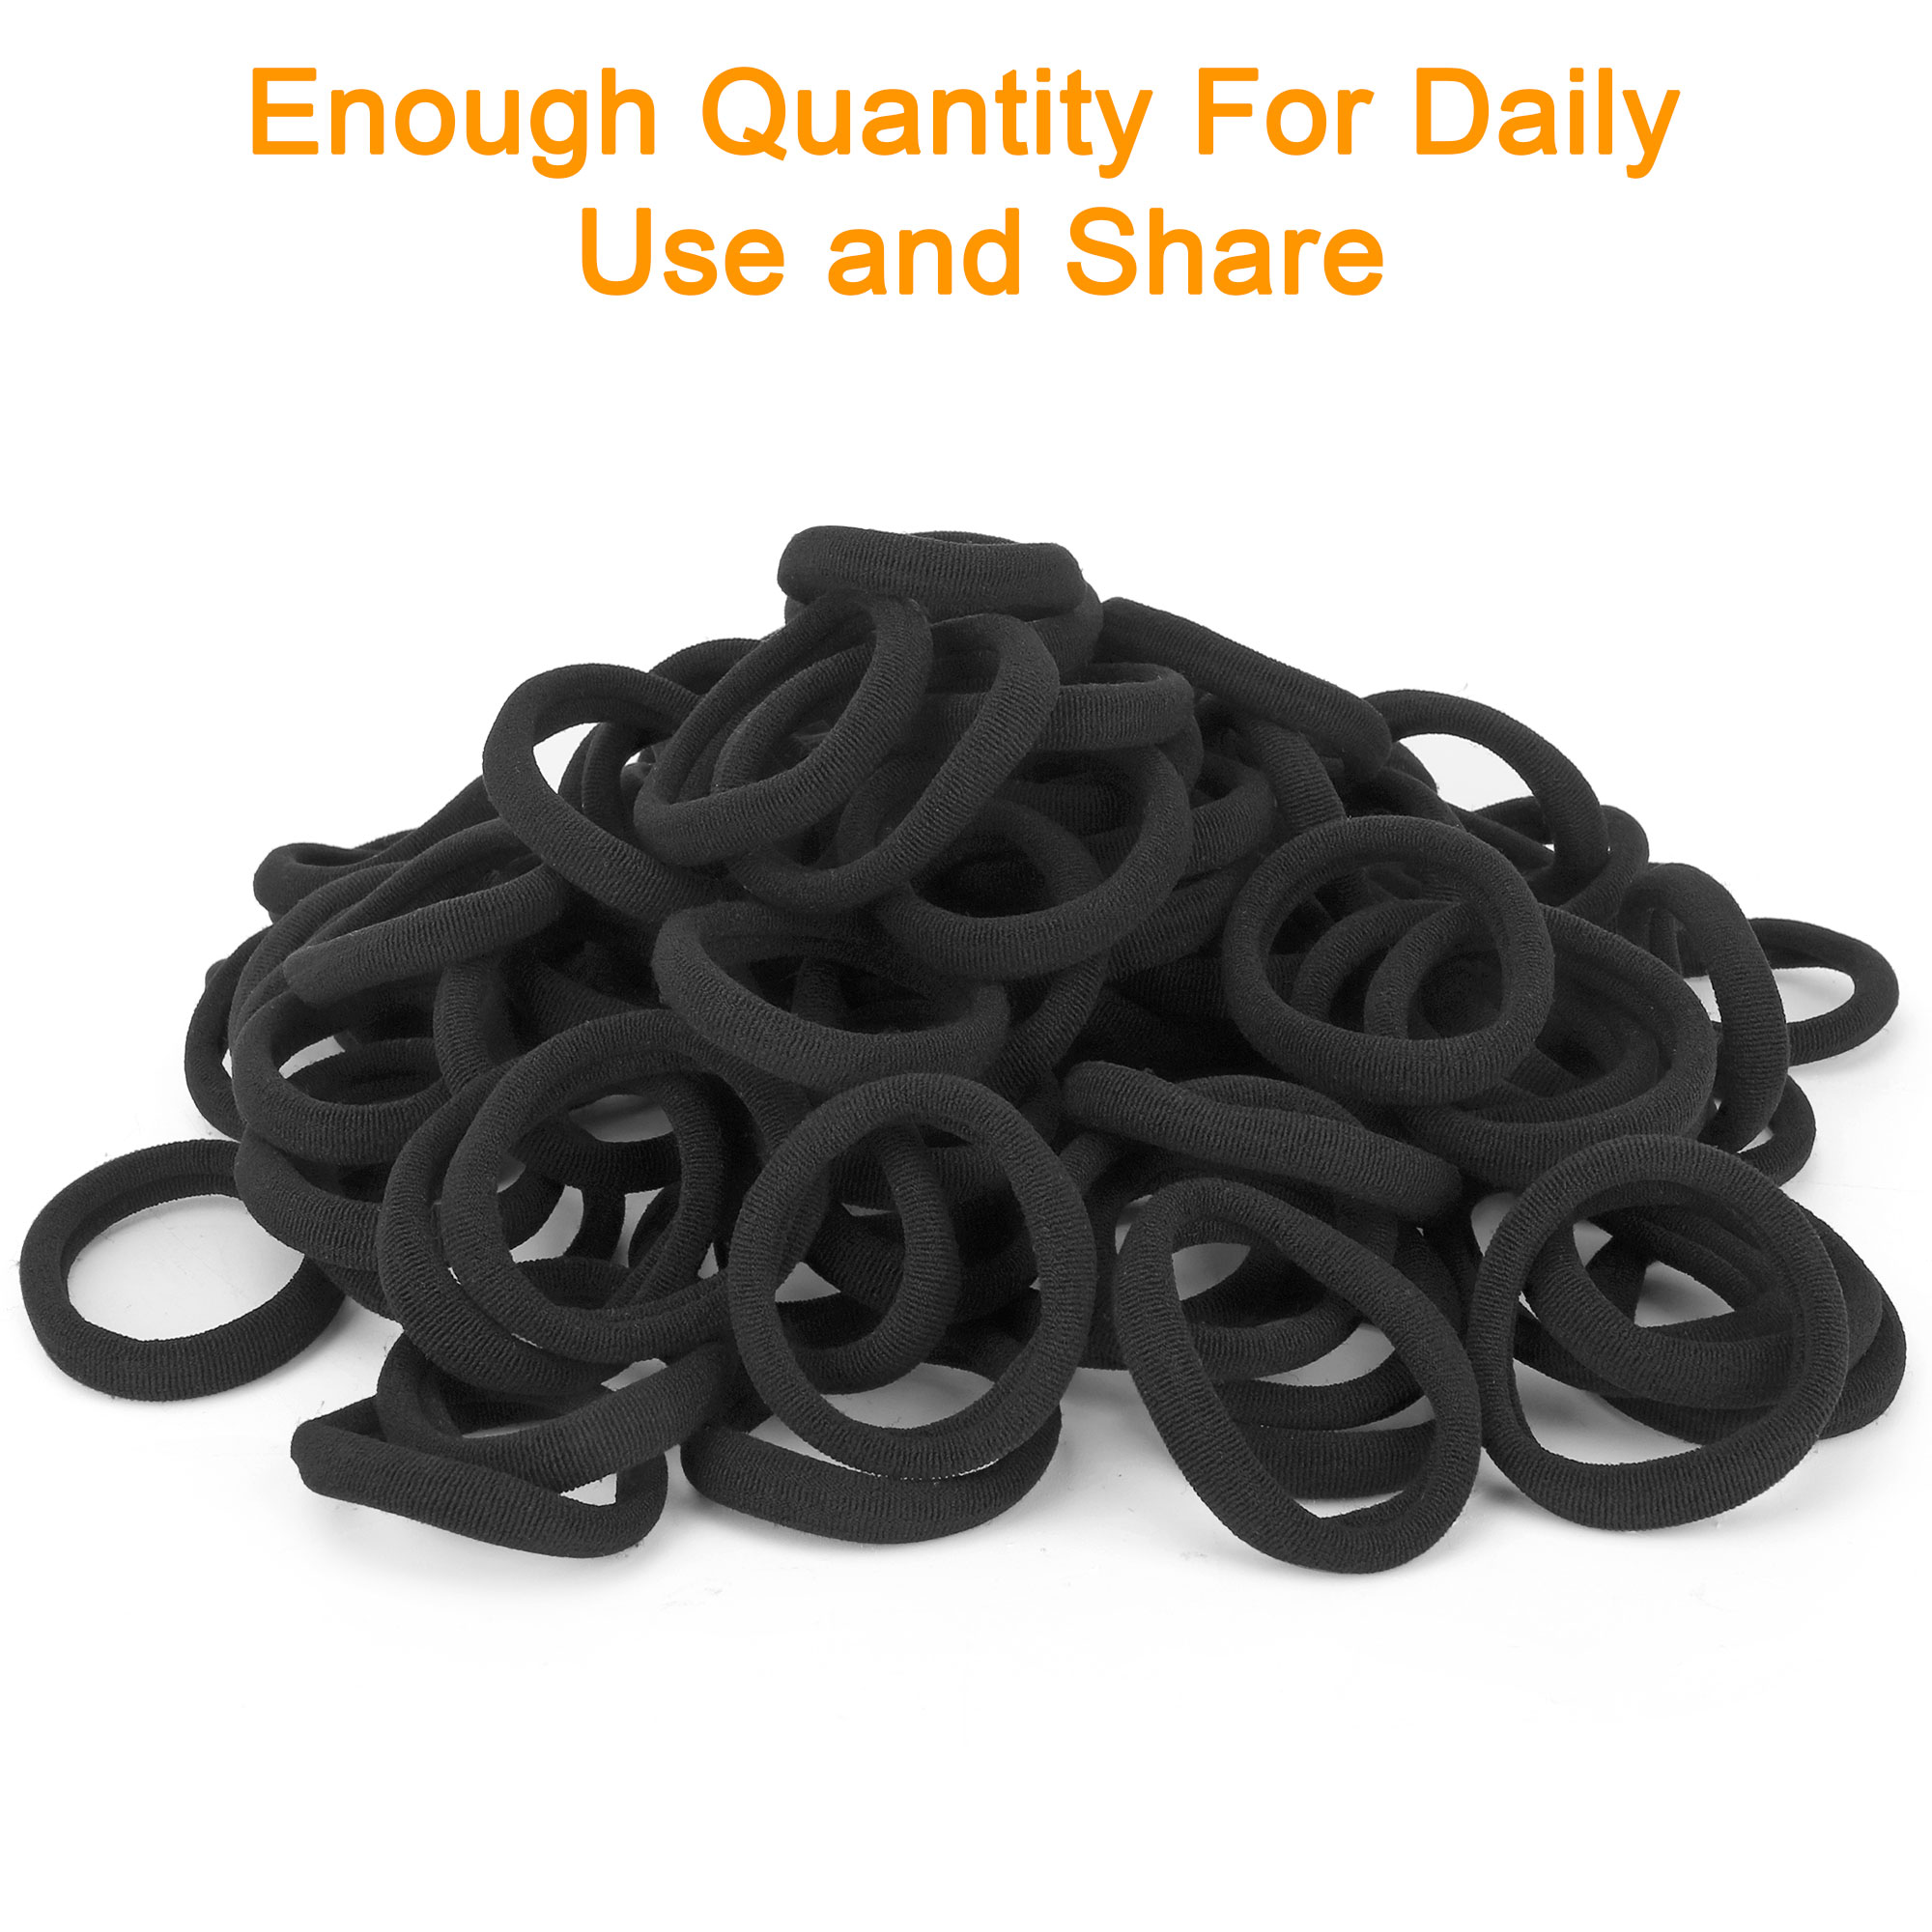 100pcs Black Hair Ties for Women Girls, TSV Seamless Thick Black Hair Bands, Elastic Stretchy Hair Ties, No Damage Ponytail Holder for Thick Heavy and Curly Hair, 1.58inch - image 2 of 9